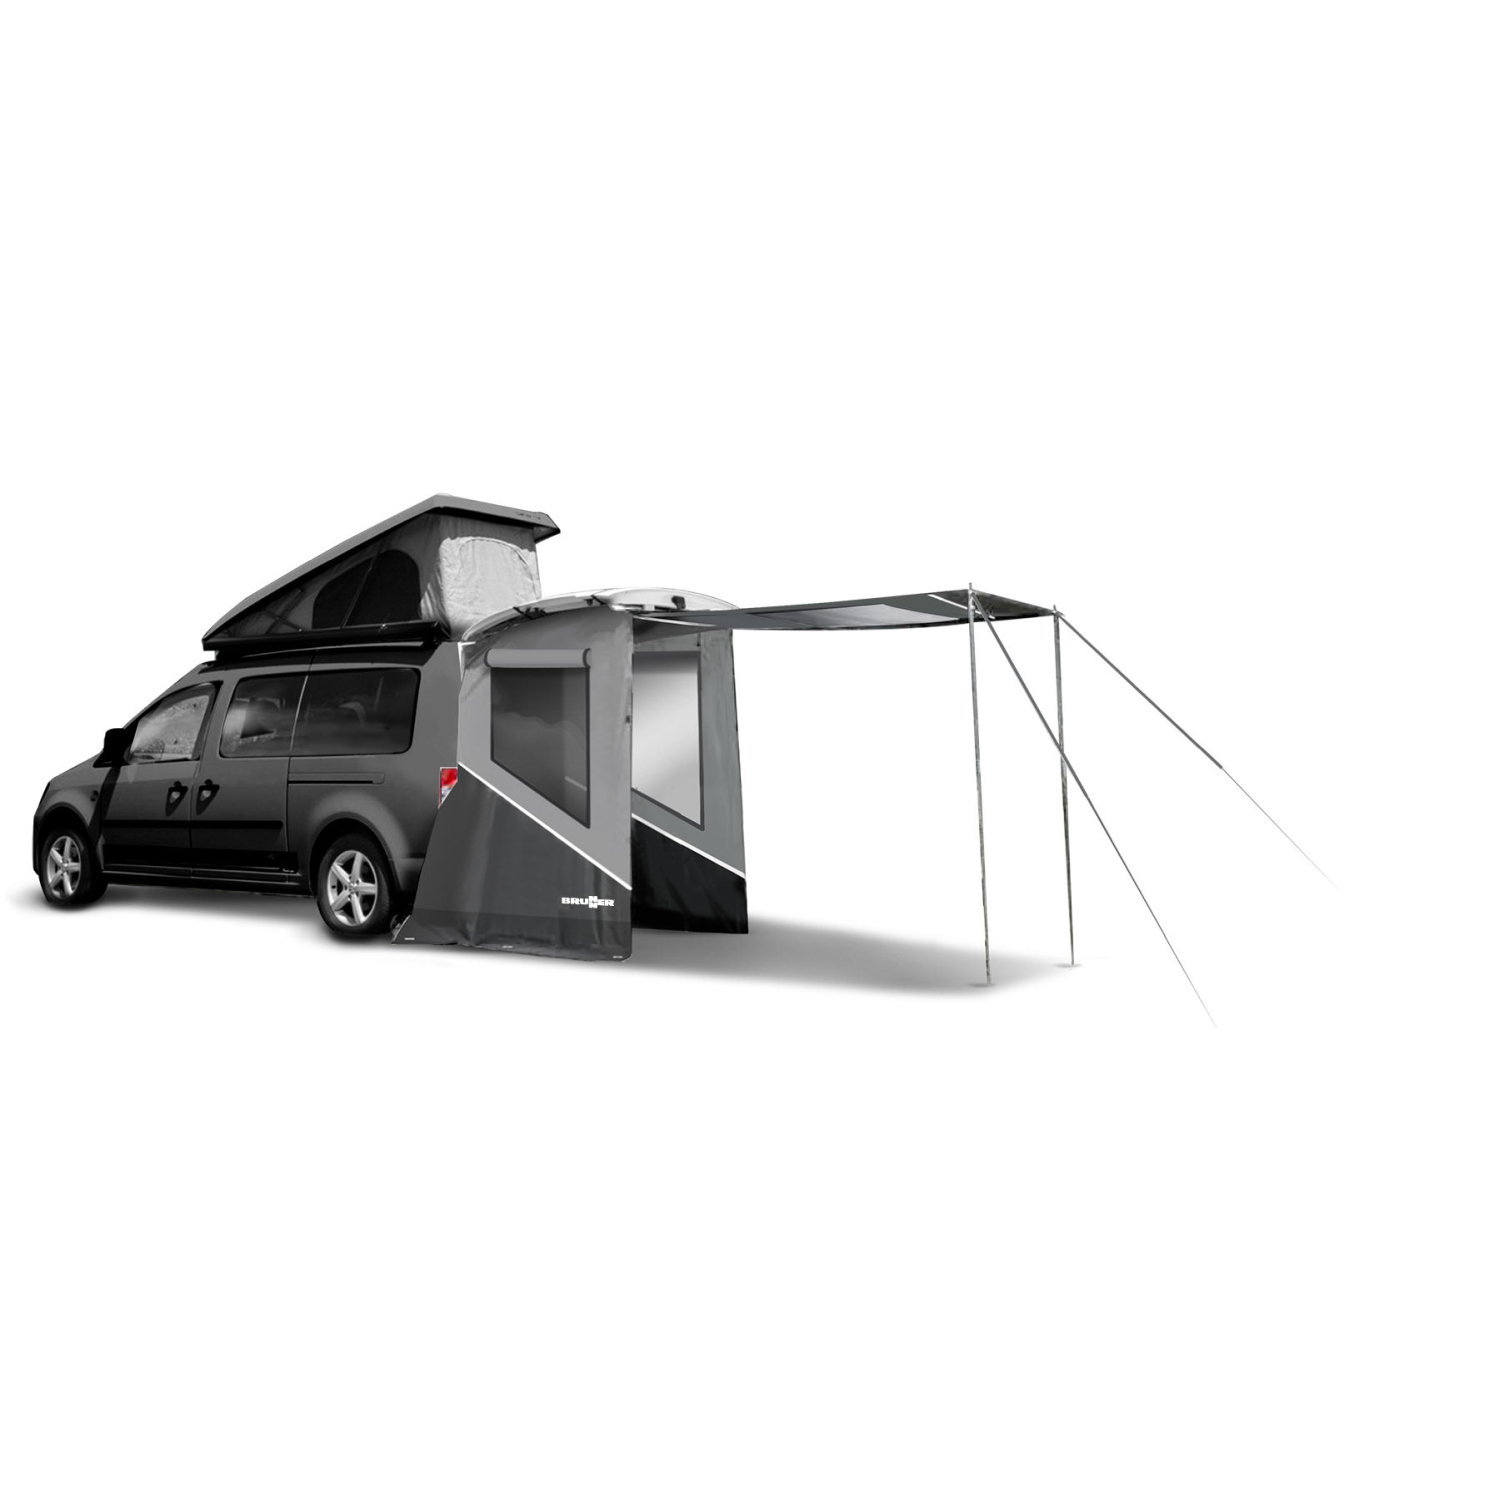 Brunner Awing Pilot for VW, Caddy Rear Camping Tent, Tailgate